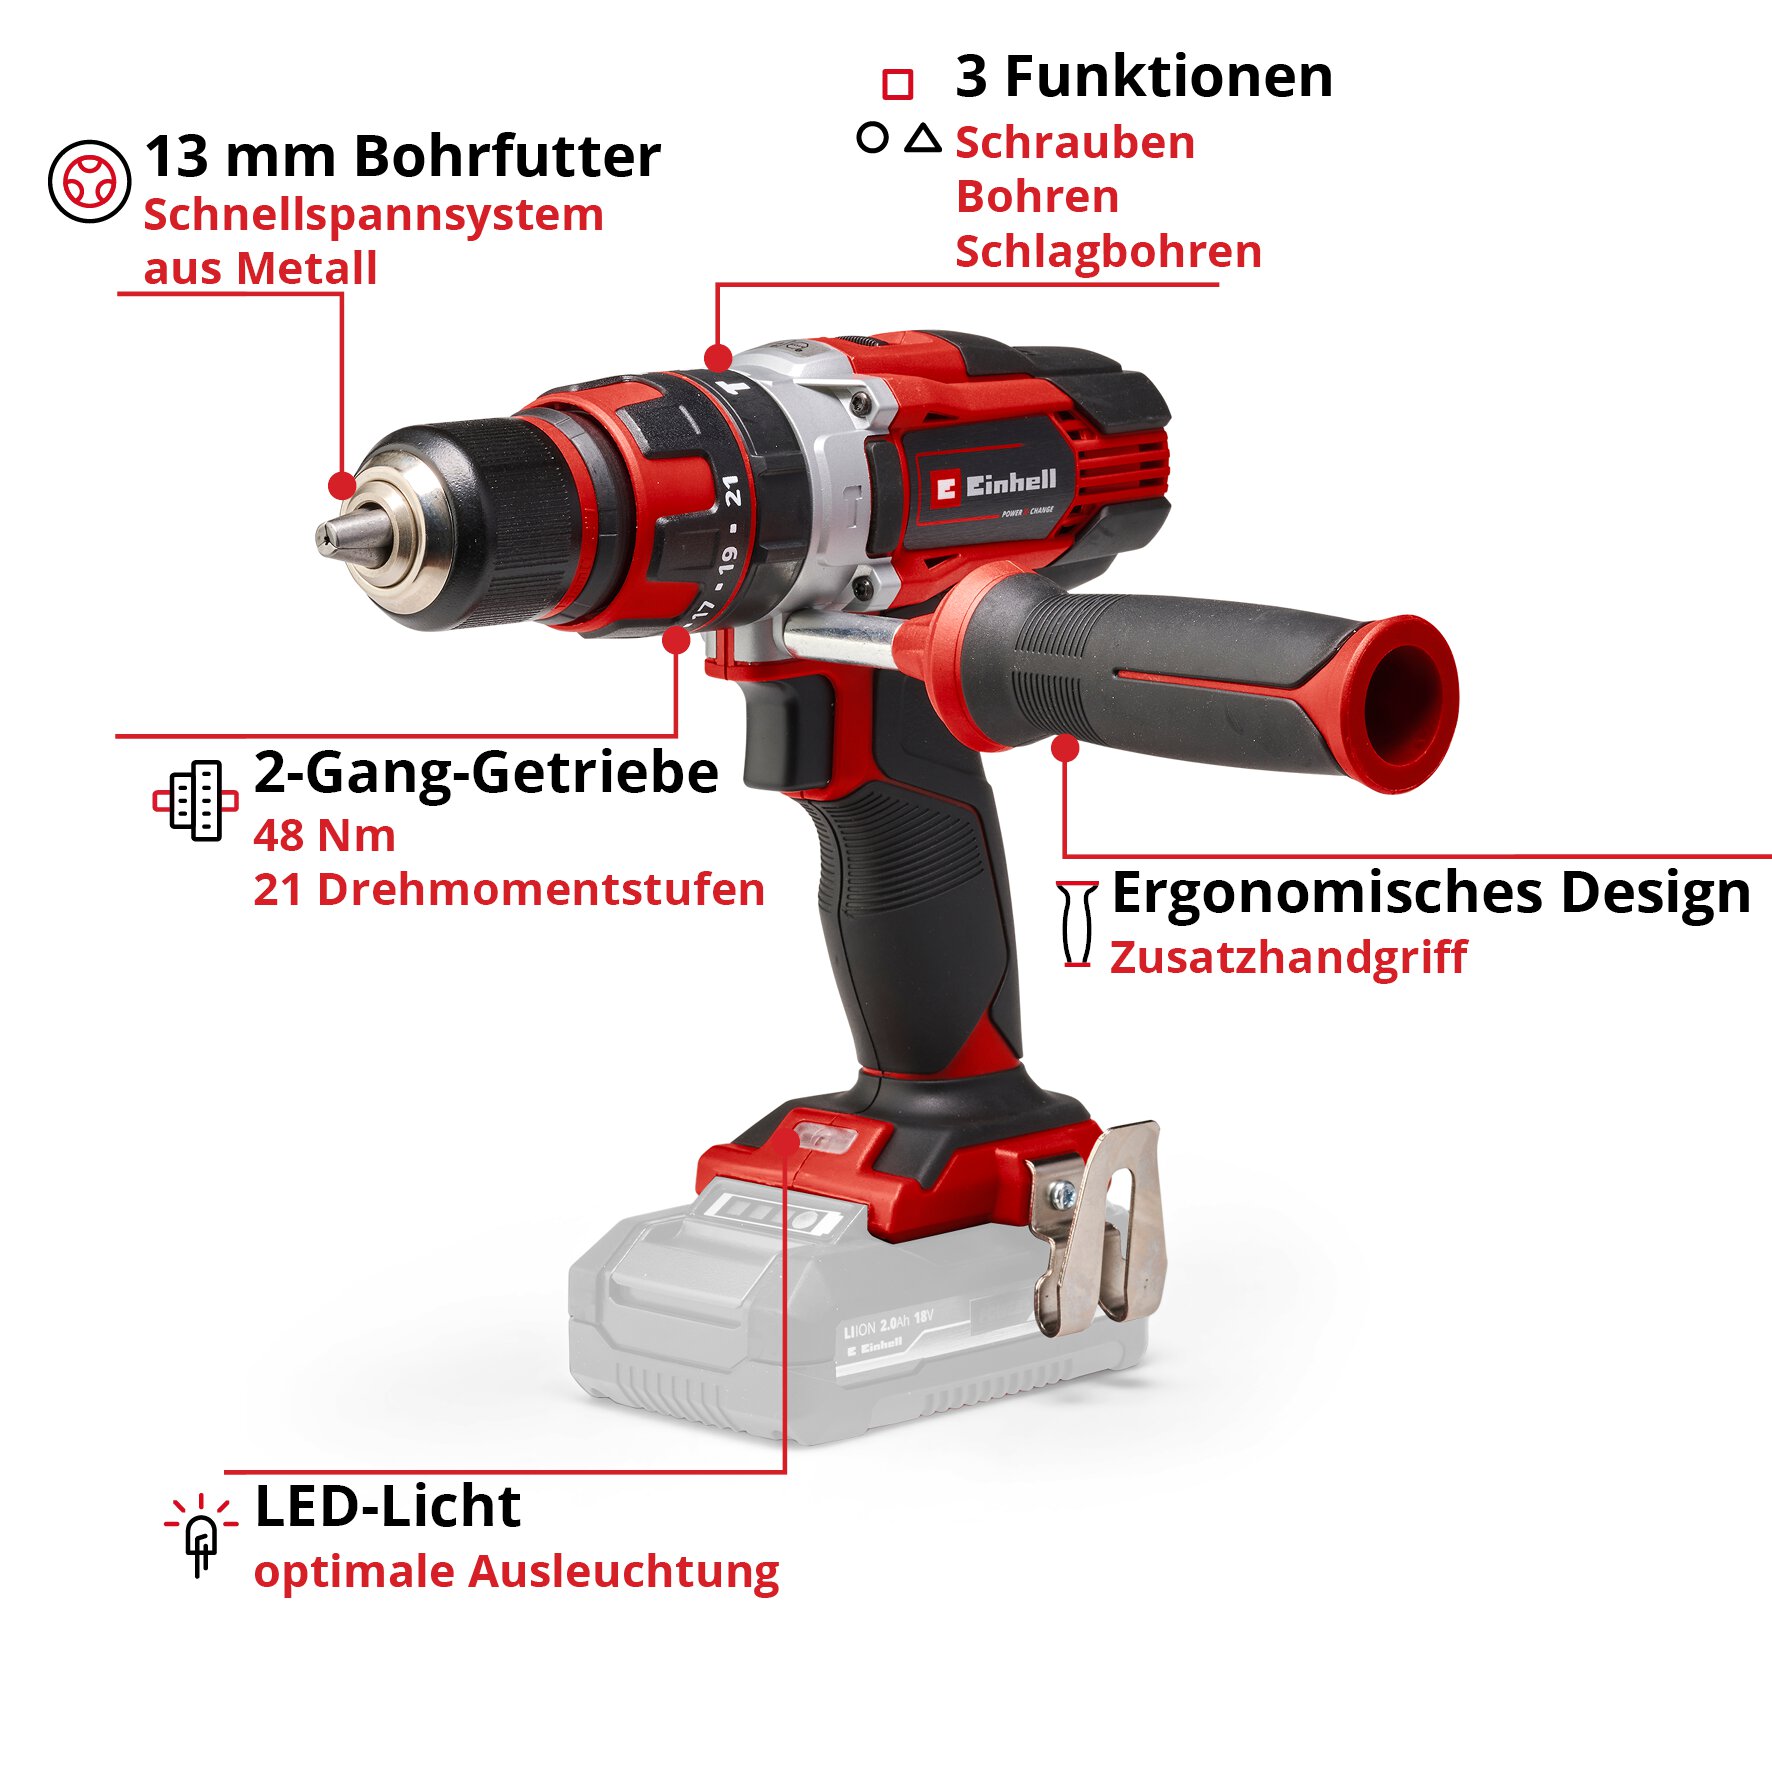 einhell-expert-cordless-impact-drill-4513926-key_feature_image-001